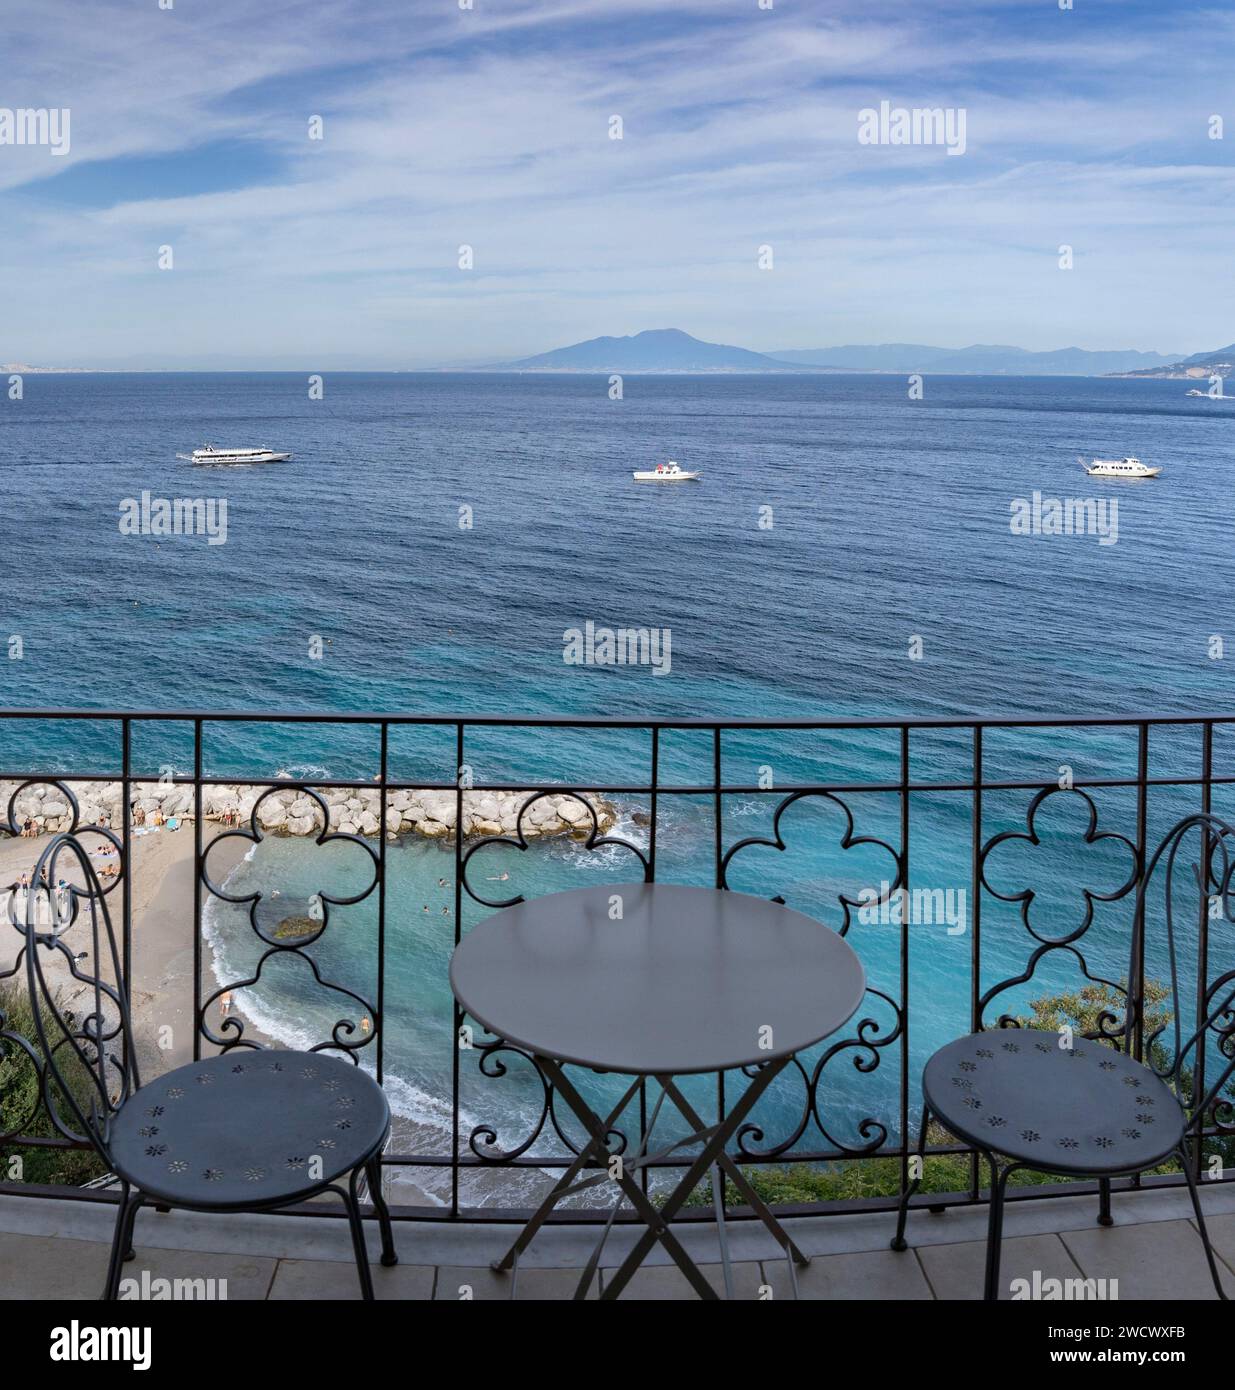 Italy, Campania, the Bay of Naples, Capri island, view from a hotel room, Vesuvius in the background Stock Photo